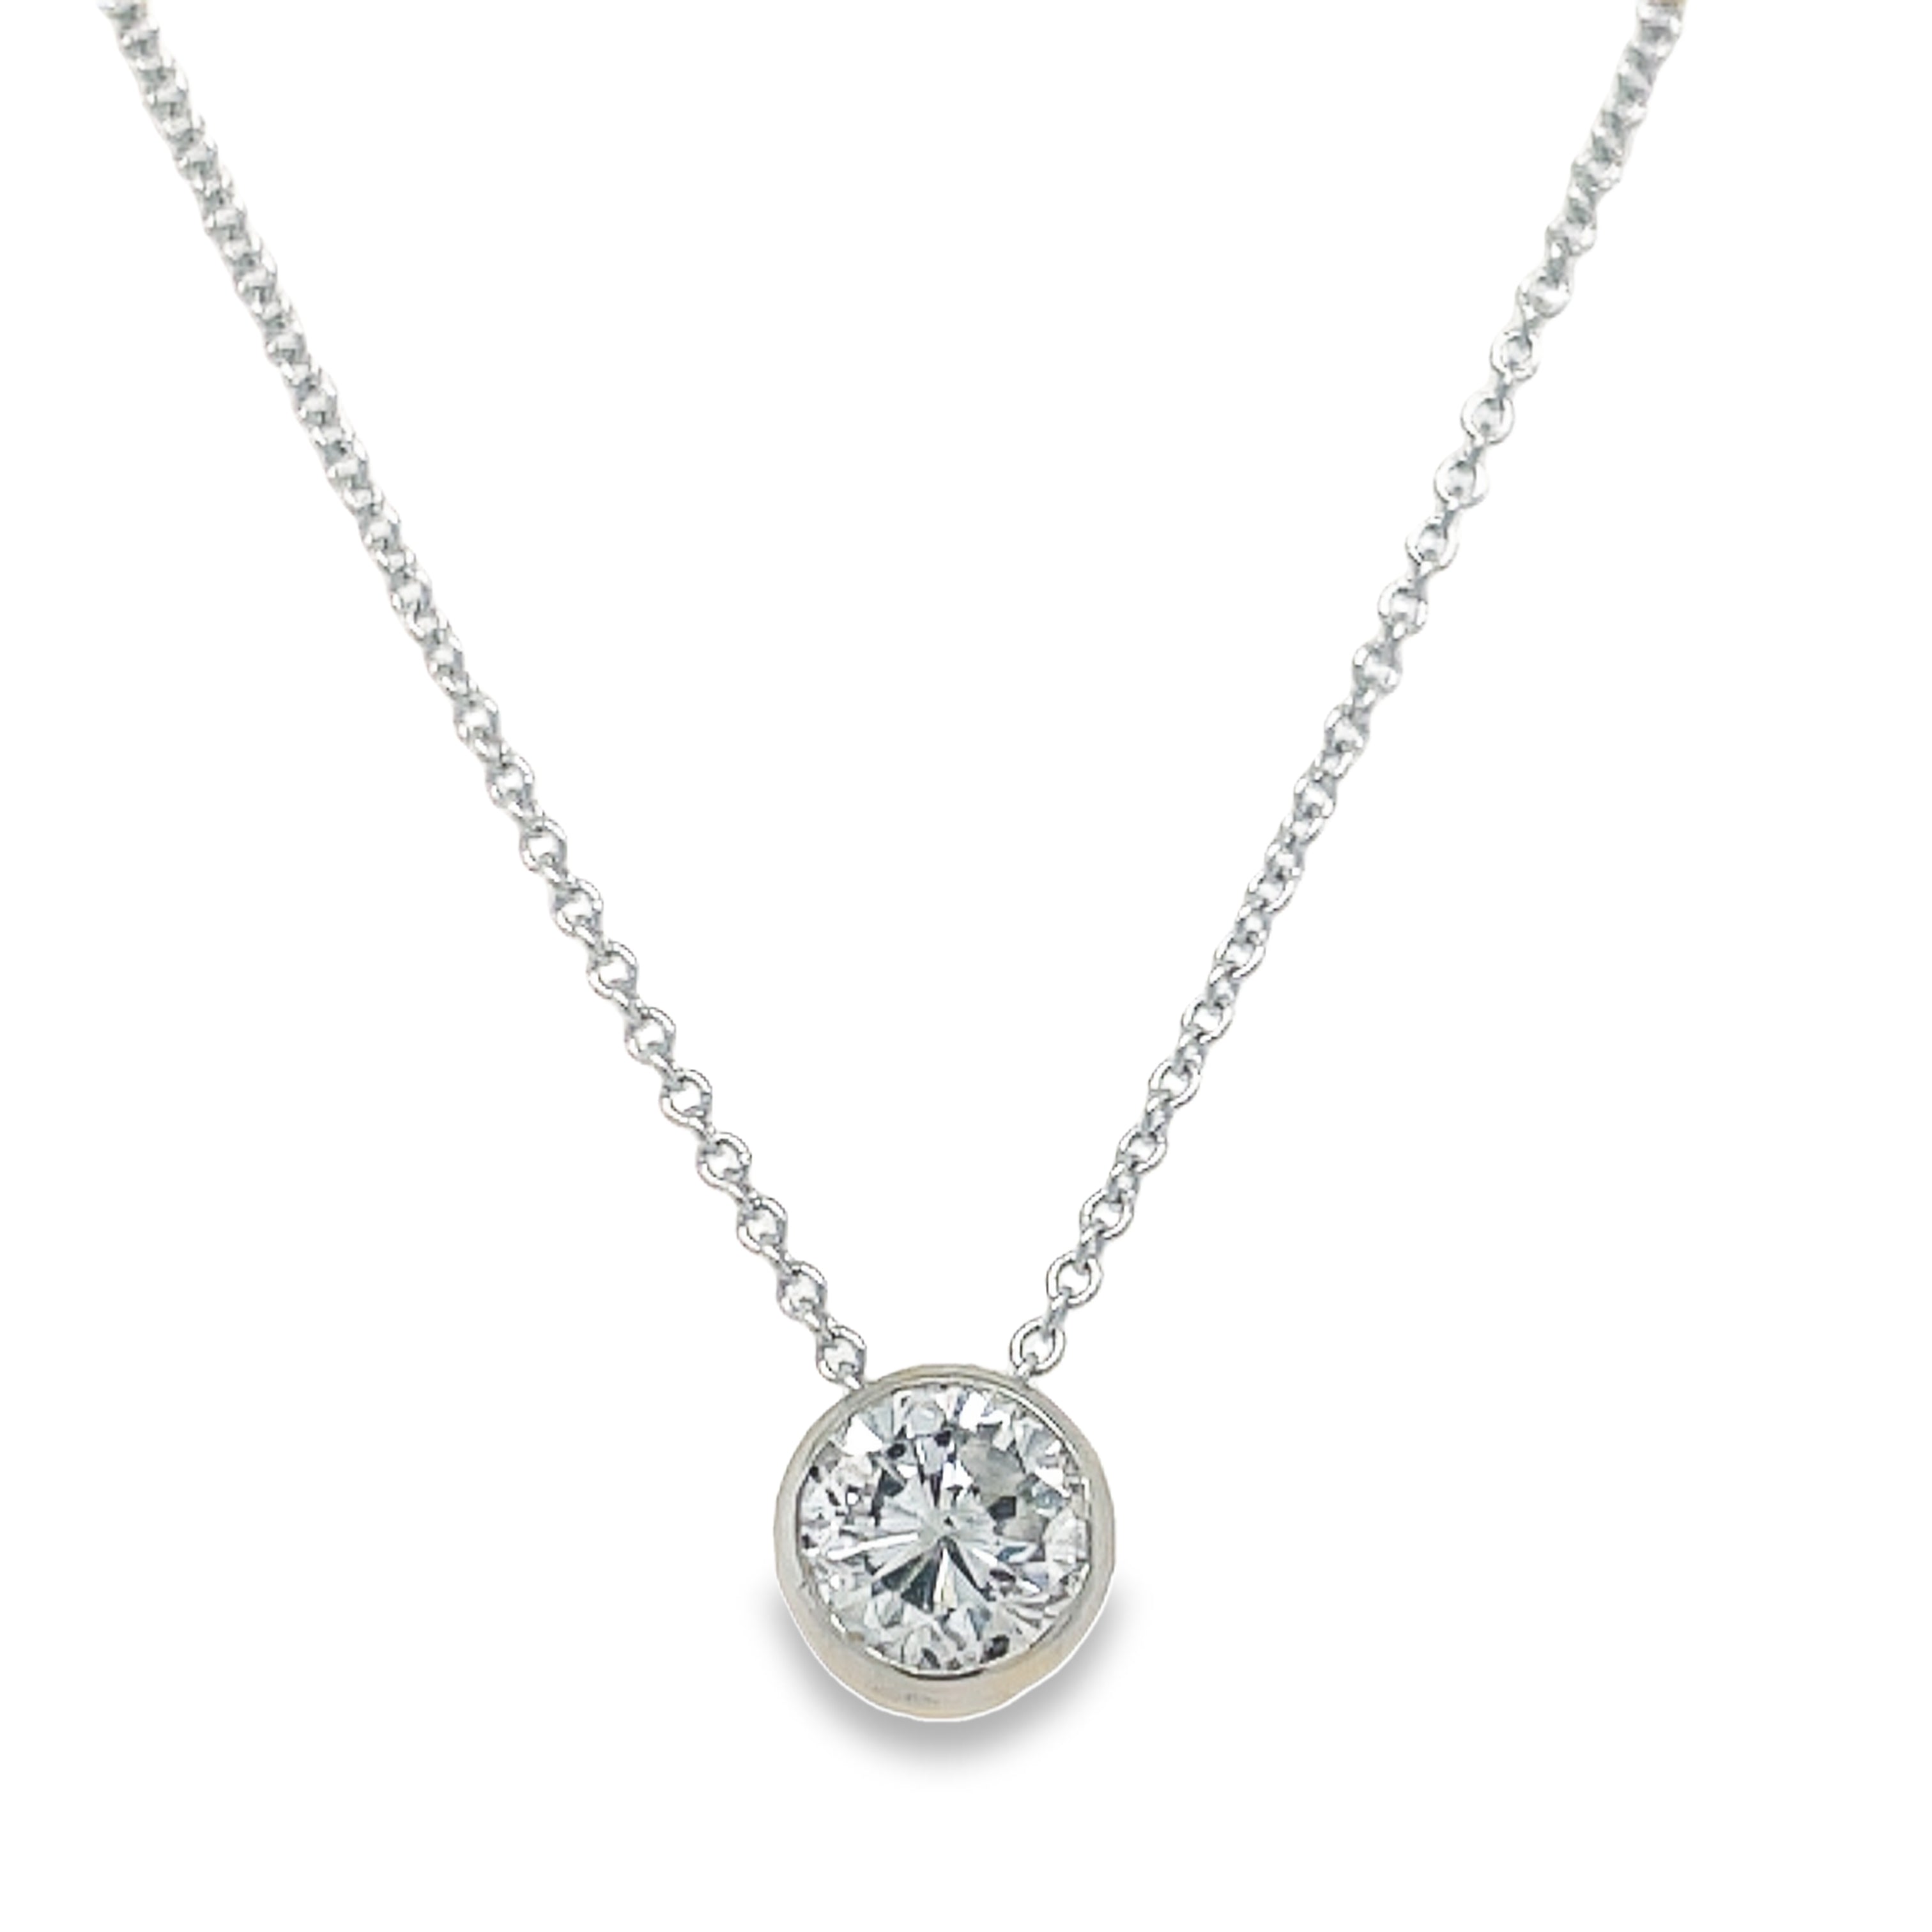 Indulge in luxury with our Round Diamond Solitaire Pendant Necklace. Crafted from 14k white gold, this necklace showcases a stunning round diamond weighing 0.89 cts. With a color grade of H/I and clarity of SI2, this piece radiates elegance and sophistication. The 18' length adds versatility, making it perfect for any occasion. Elevate your style with this exquisite necklace